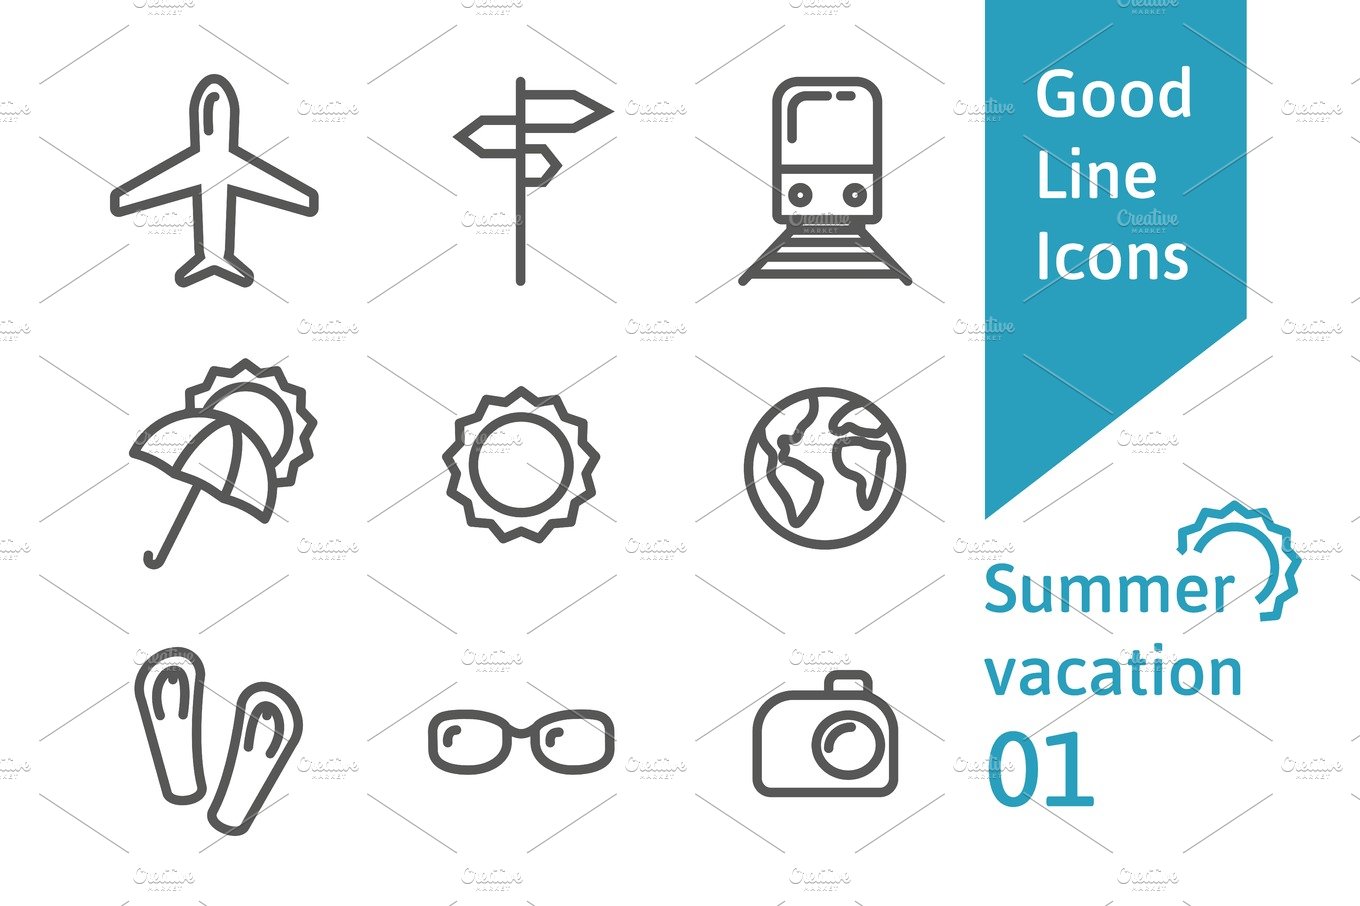 Summer vacation outline icons set 01 cover image.